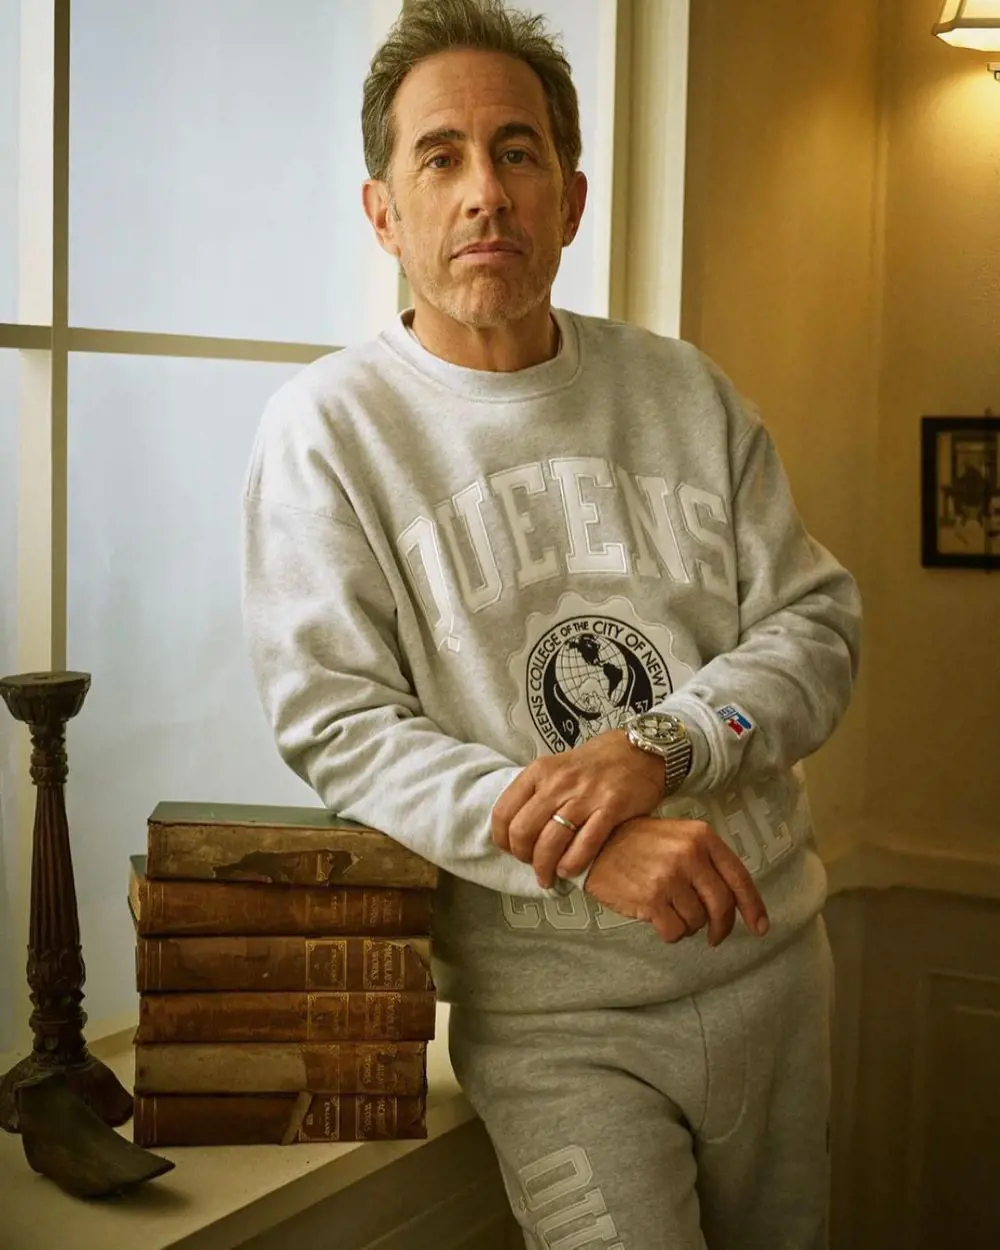 Jerry Seinfeld was honored to do a @kith collection that will benefit CUNY and his alma mater Queens College